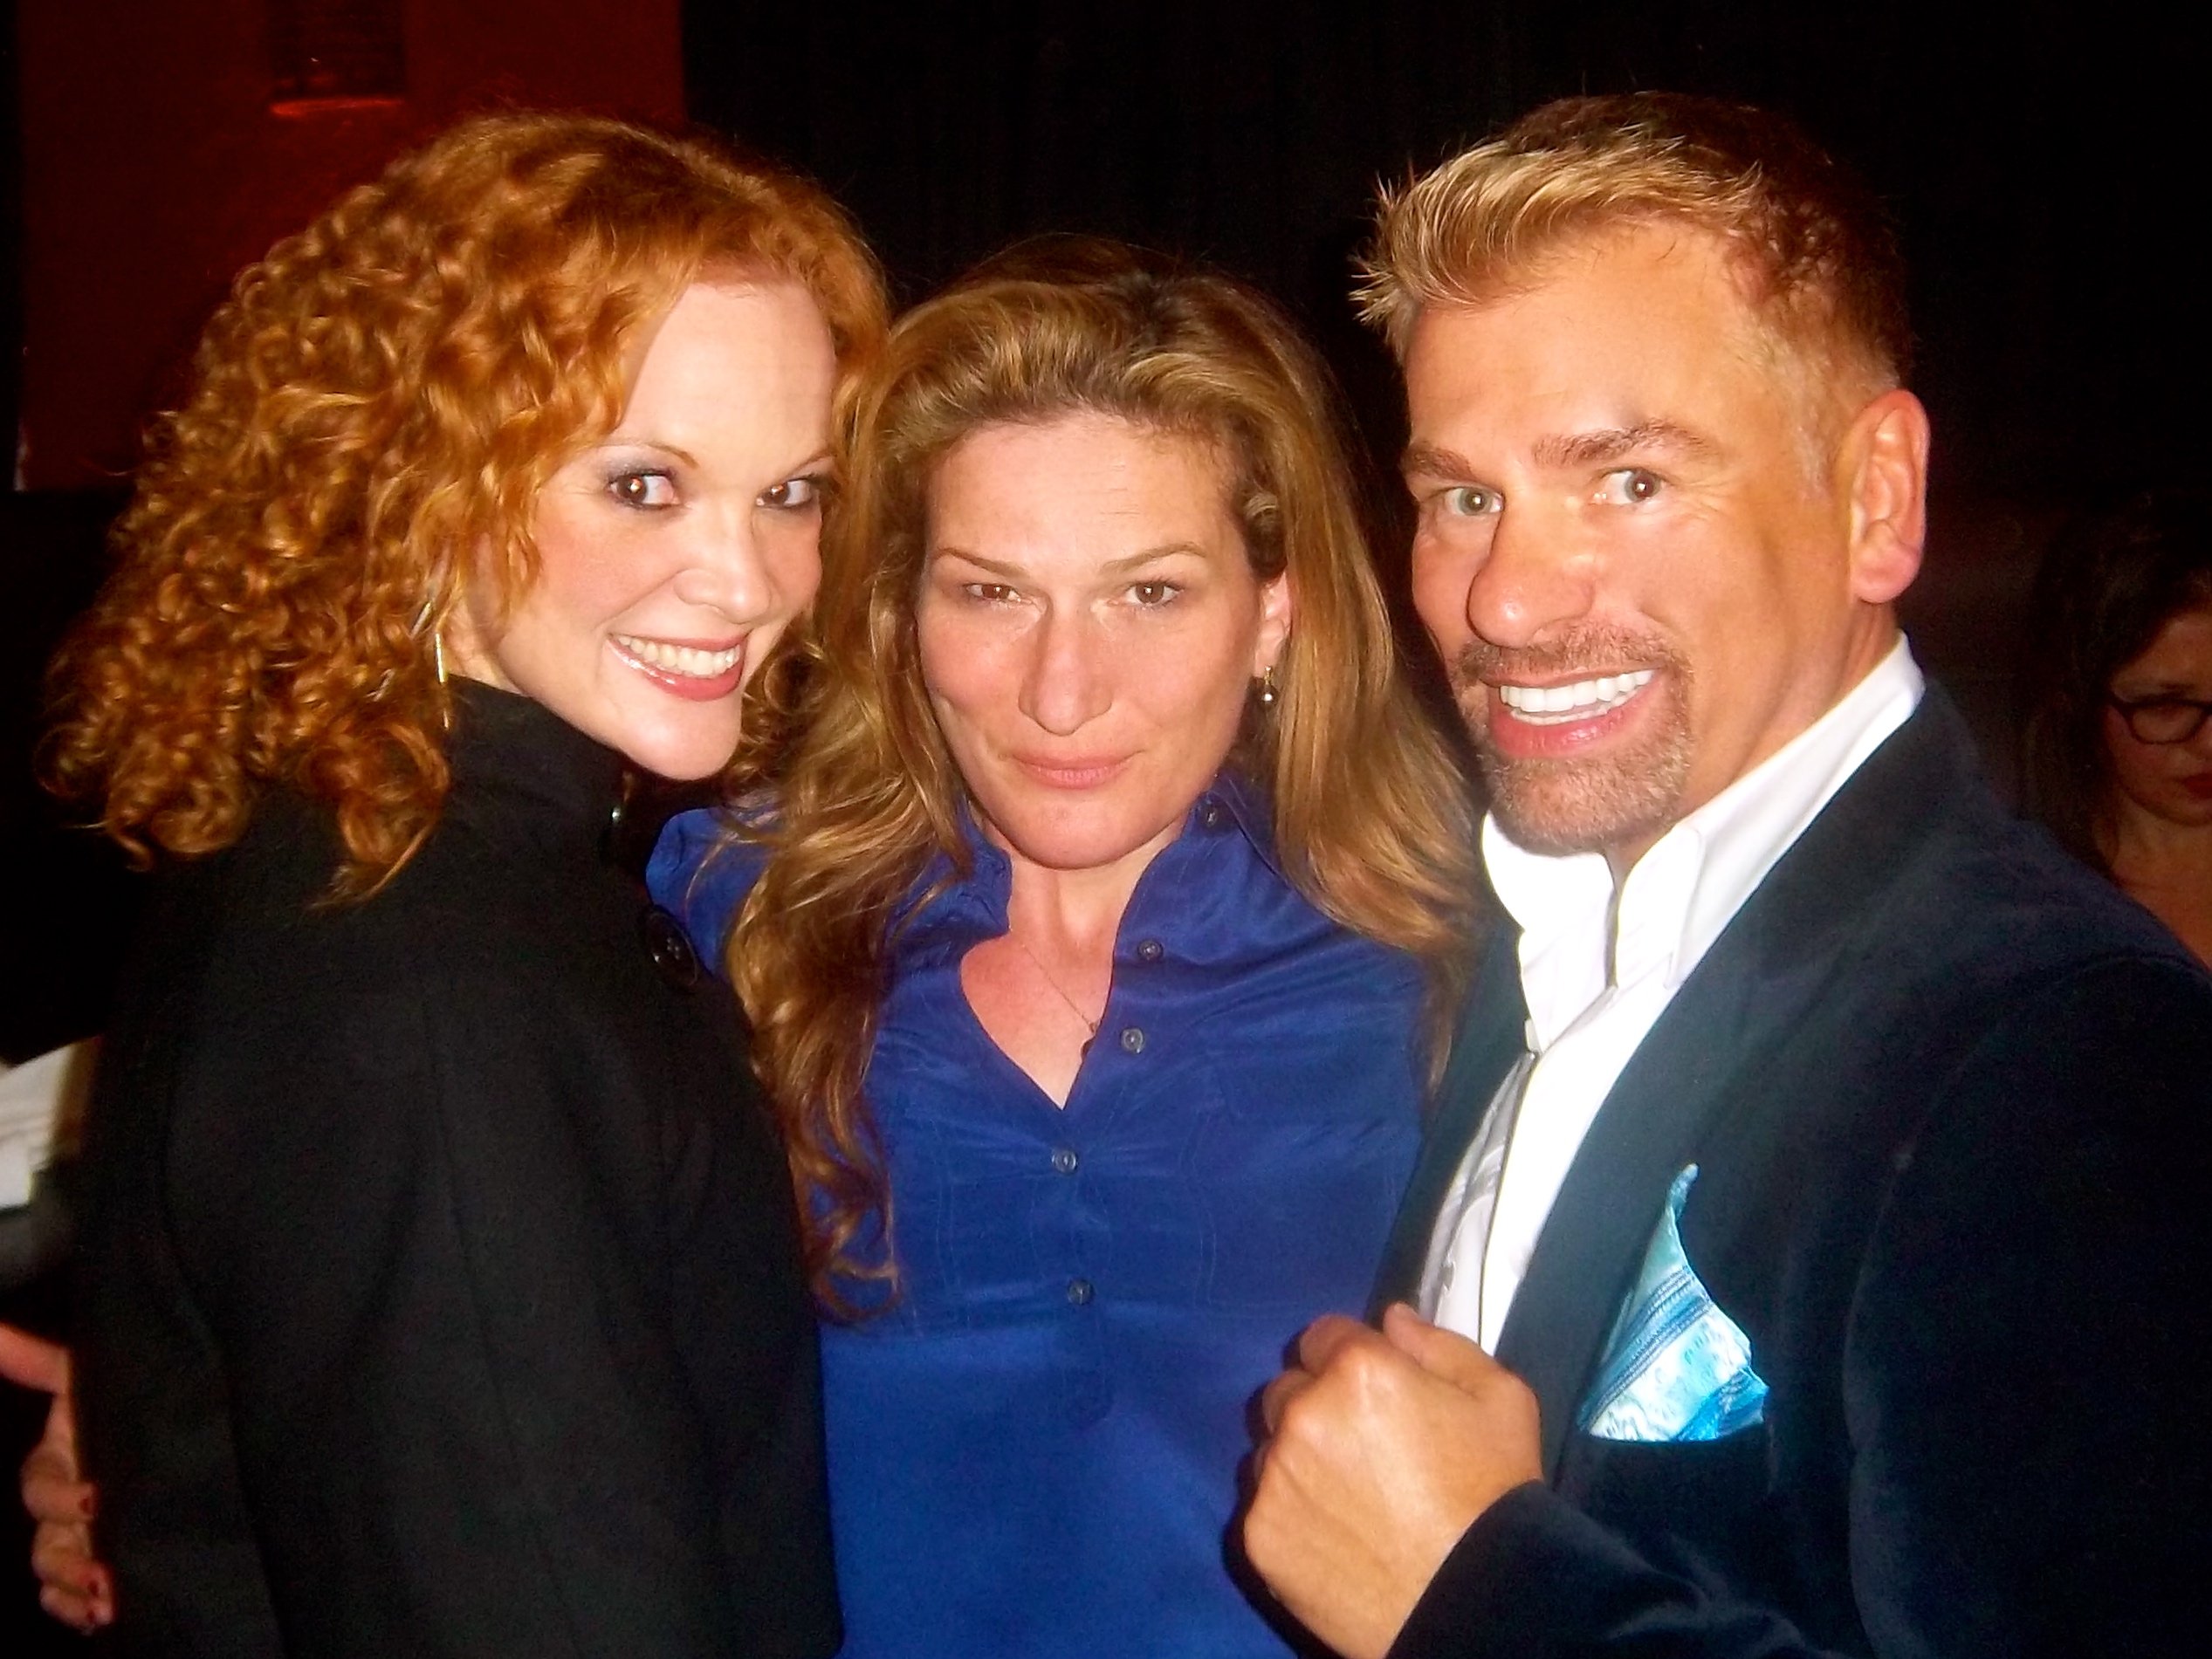 Heather Olt and I with Ana Gasteyer after her performance in our monthly show UP WITH A TWIST!